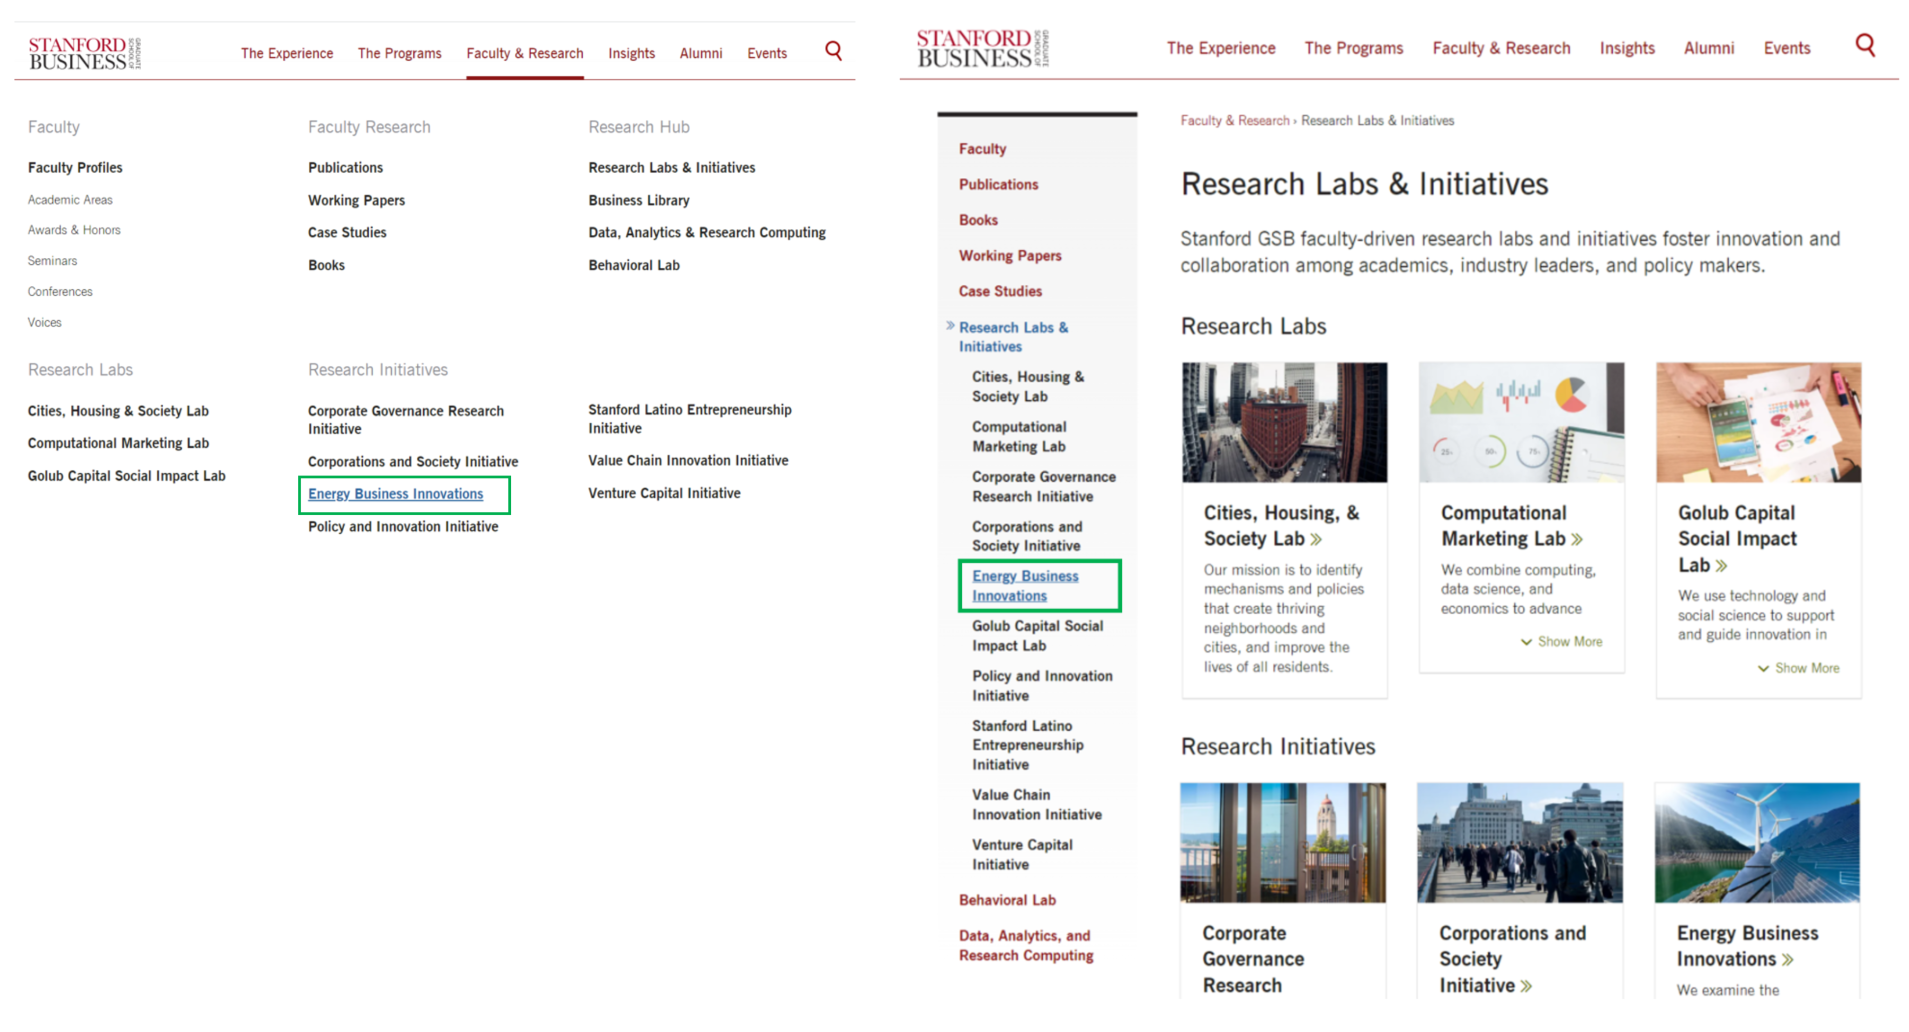 Screenshots of Stanford Graduate School of Business megamenu and left-hand menu showing the position of the link participants are required to find in the test